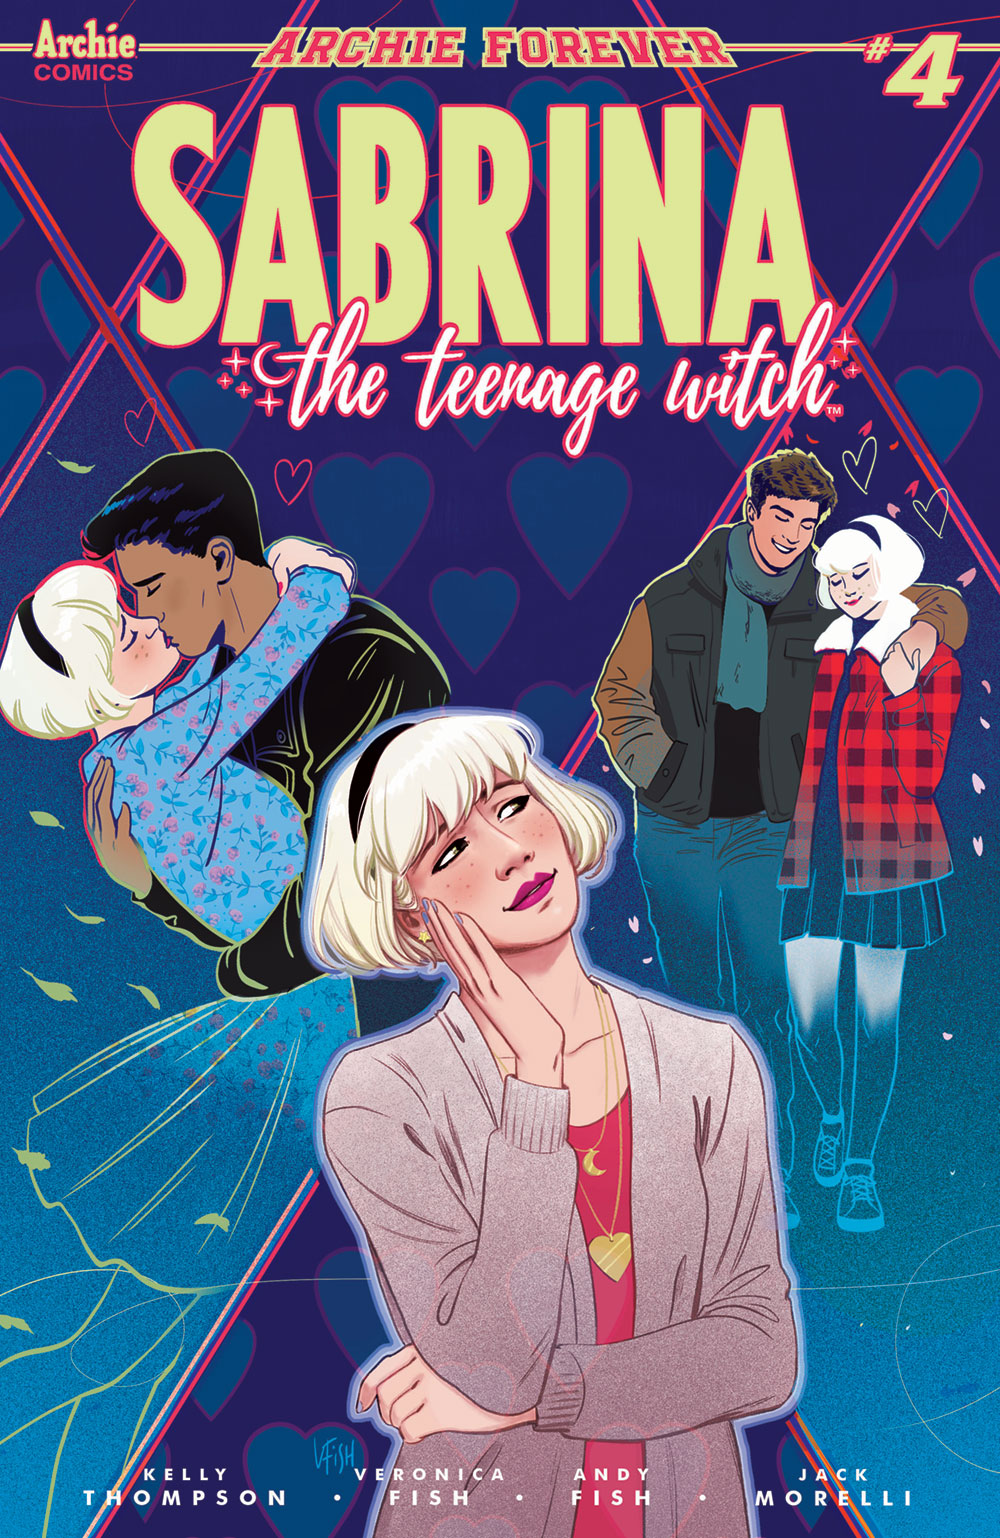 A Witch Hunt Begins In Sabrina The Teenage Witch 4 Archie Comics